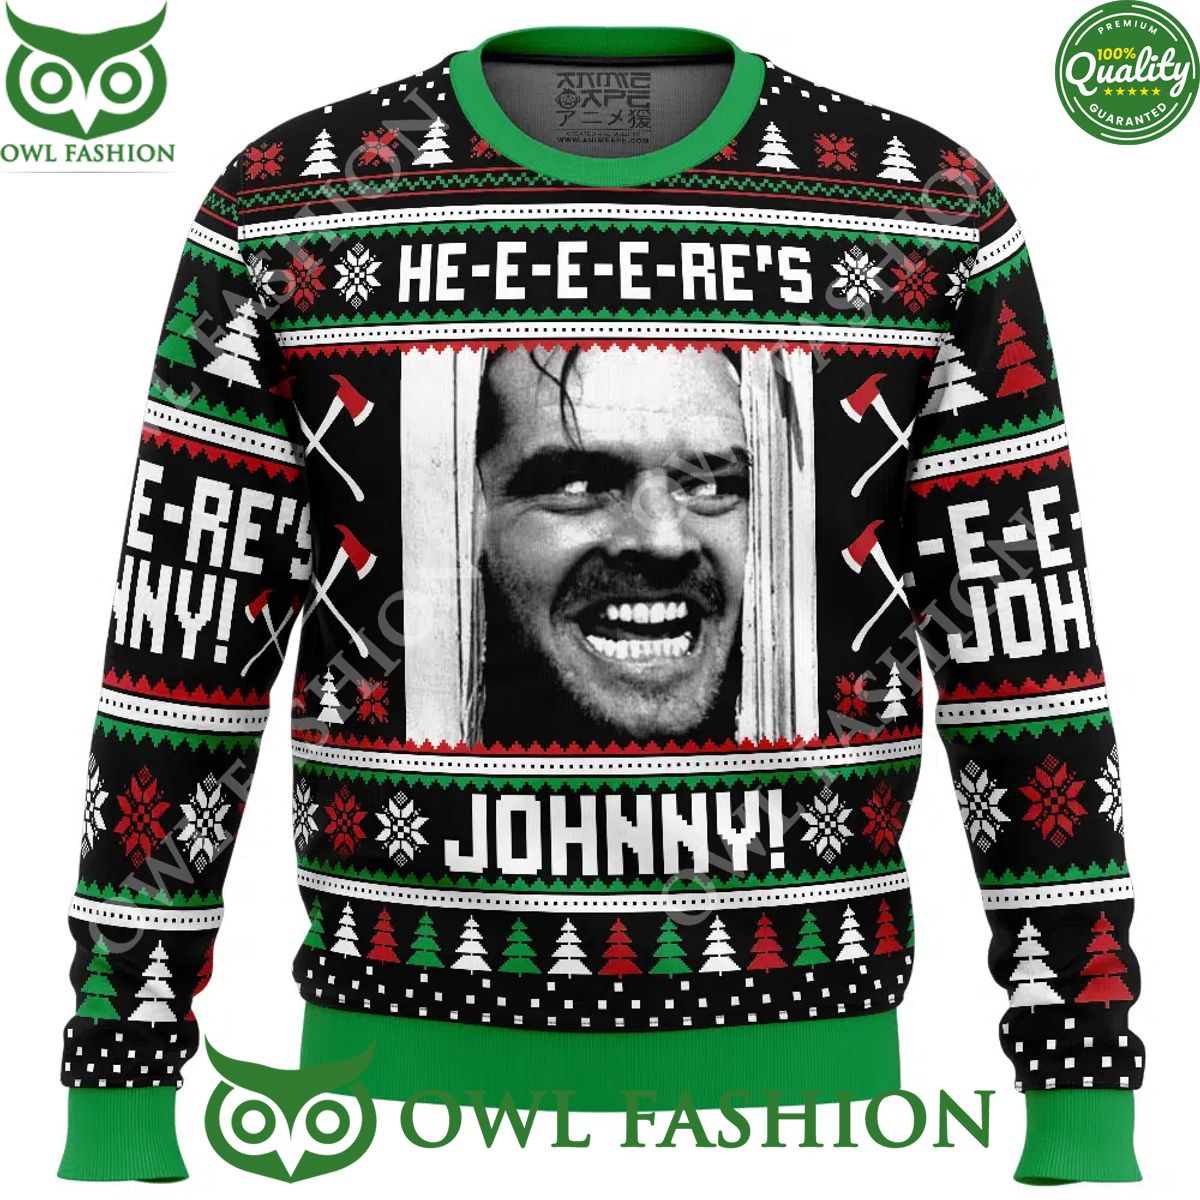 here johnny the shining ugly christmas sweater jumper 1 IXbWl.jpg